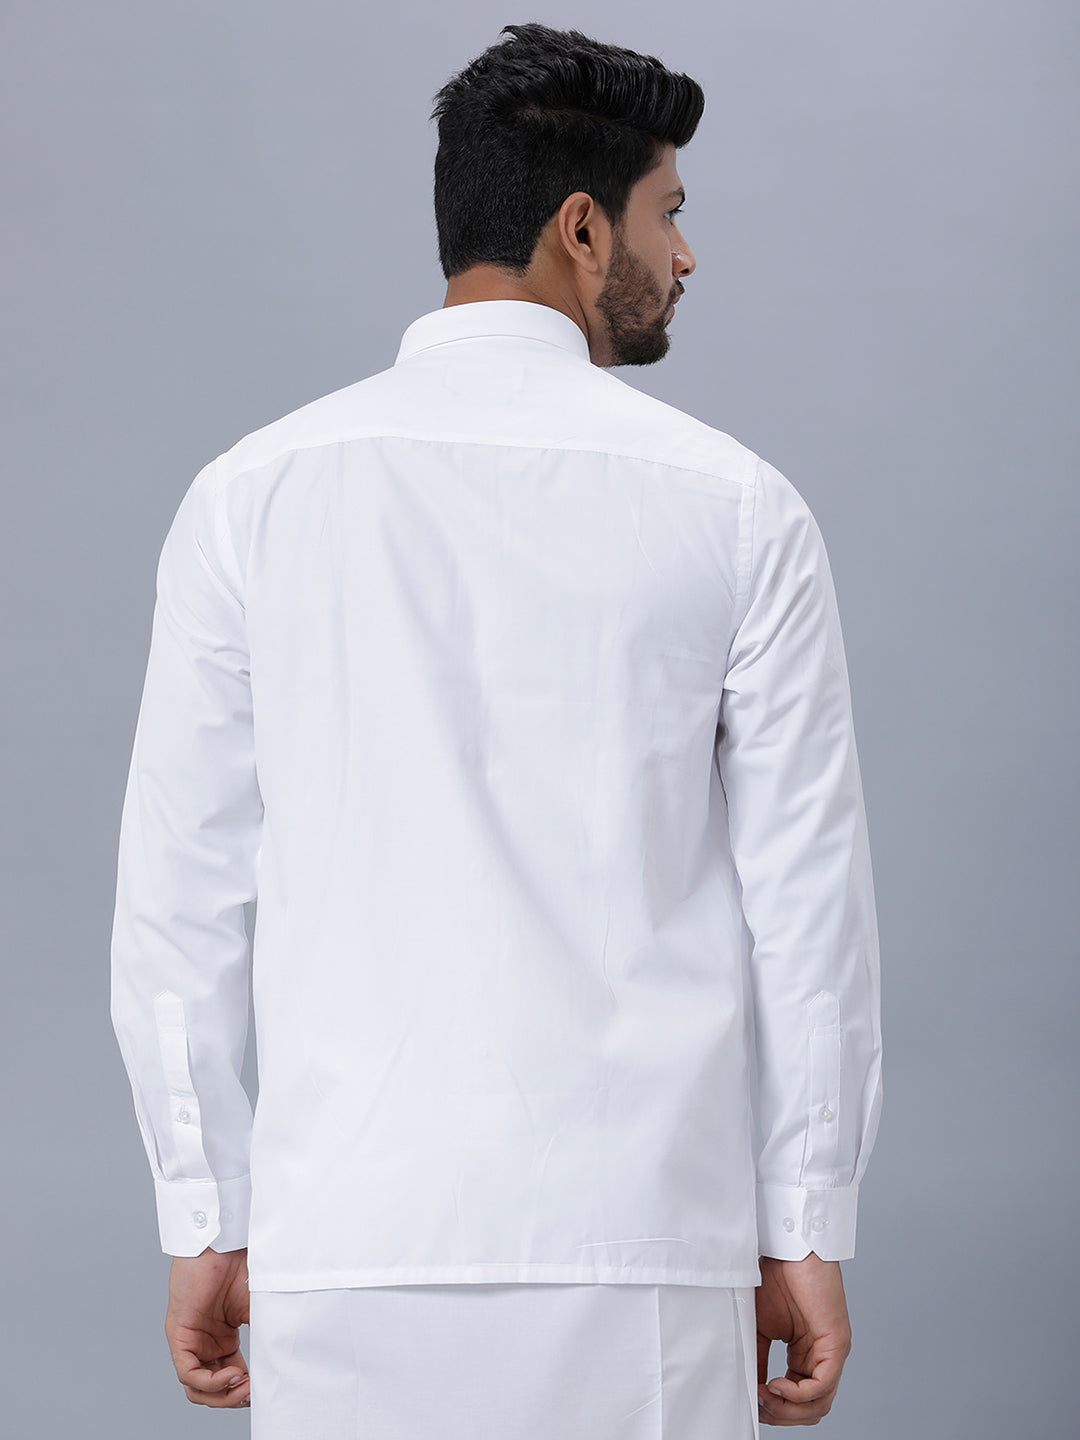 Mens Premium Pure Cotton White Shirt Full Sleeves Ultimate R7-Back view